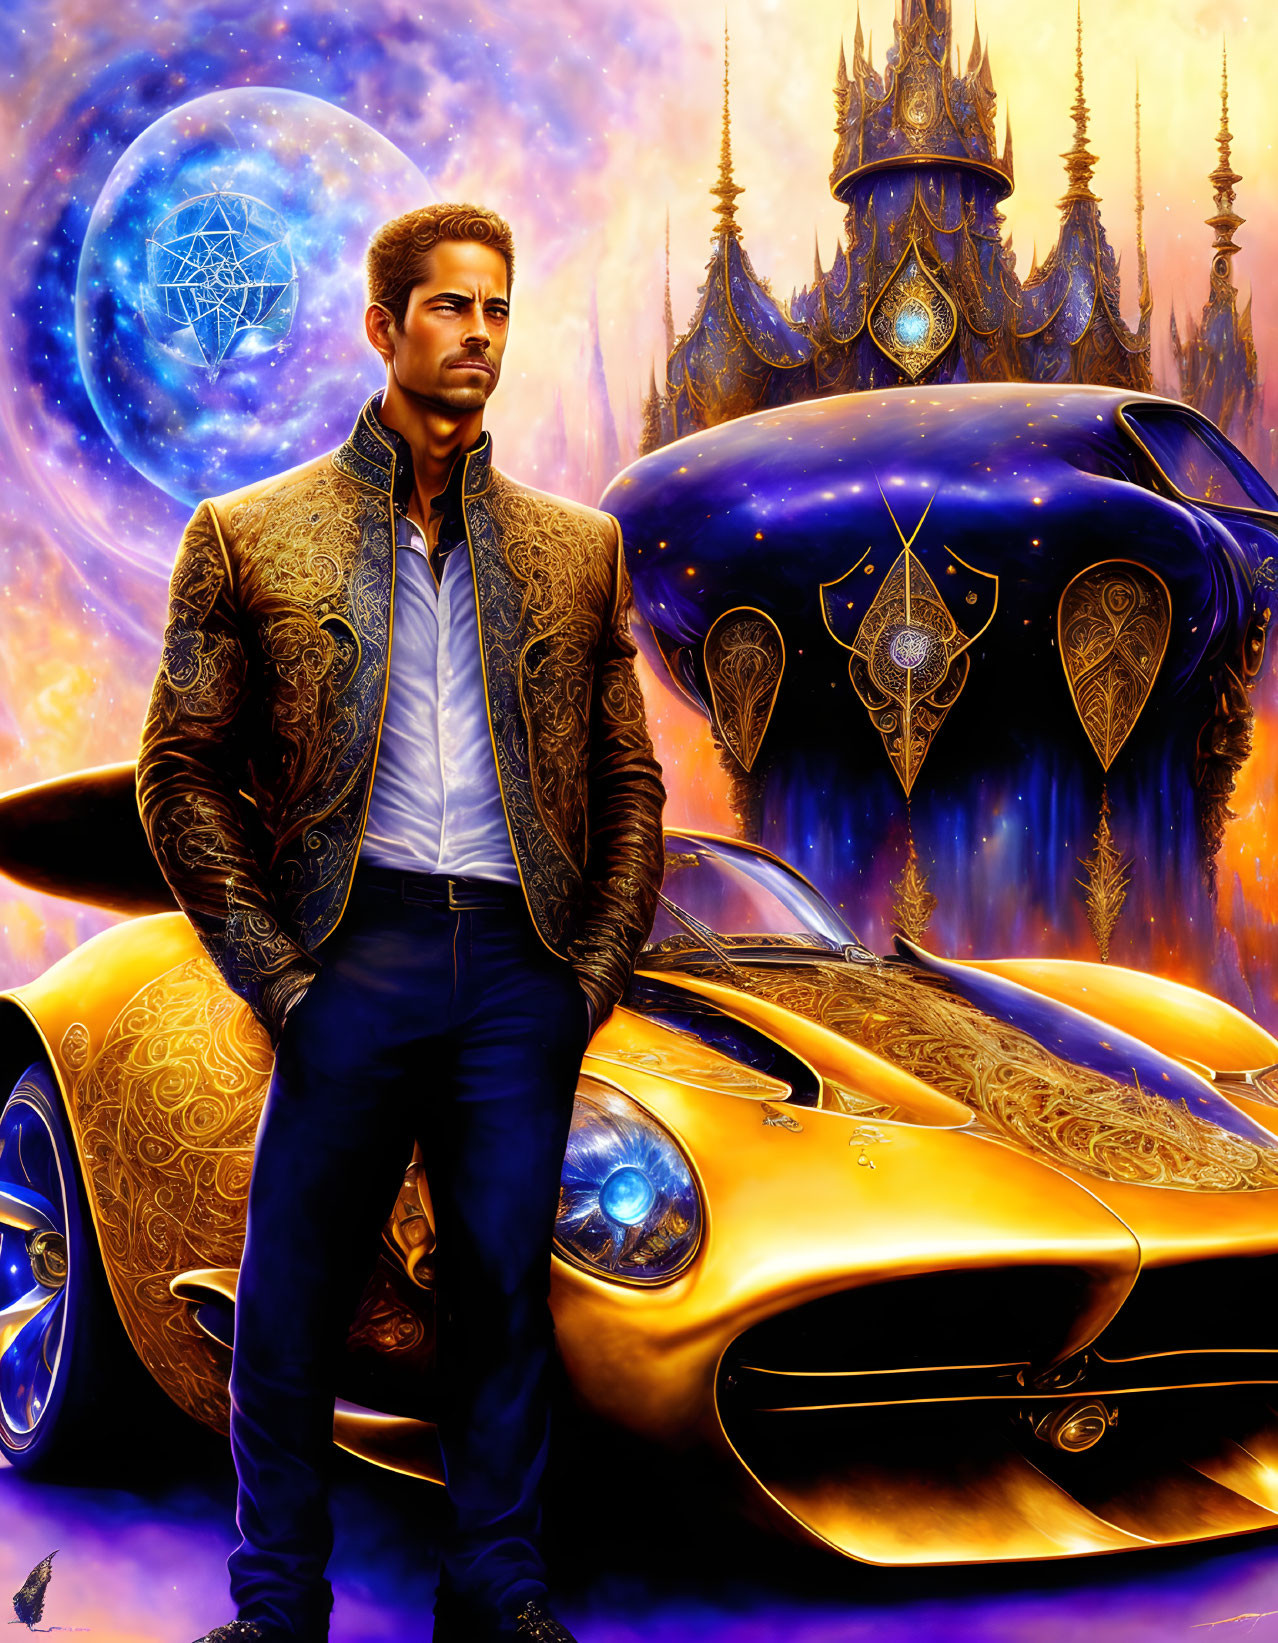 Illustration of man leaning on classic car in cosmic setting